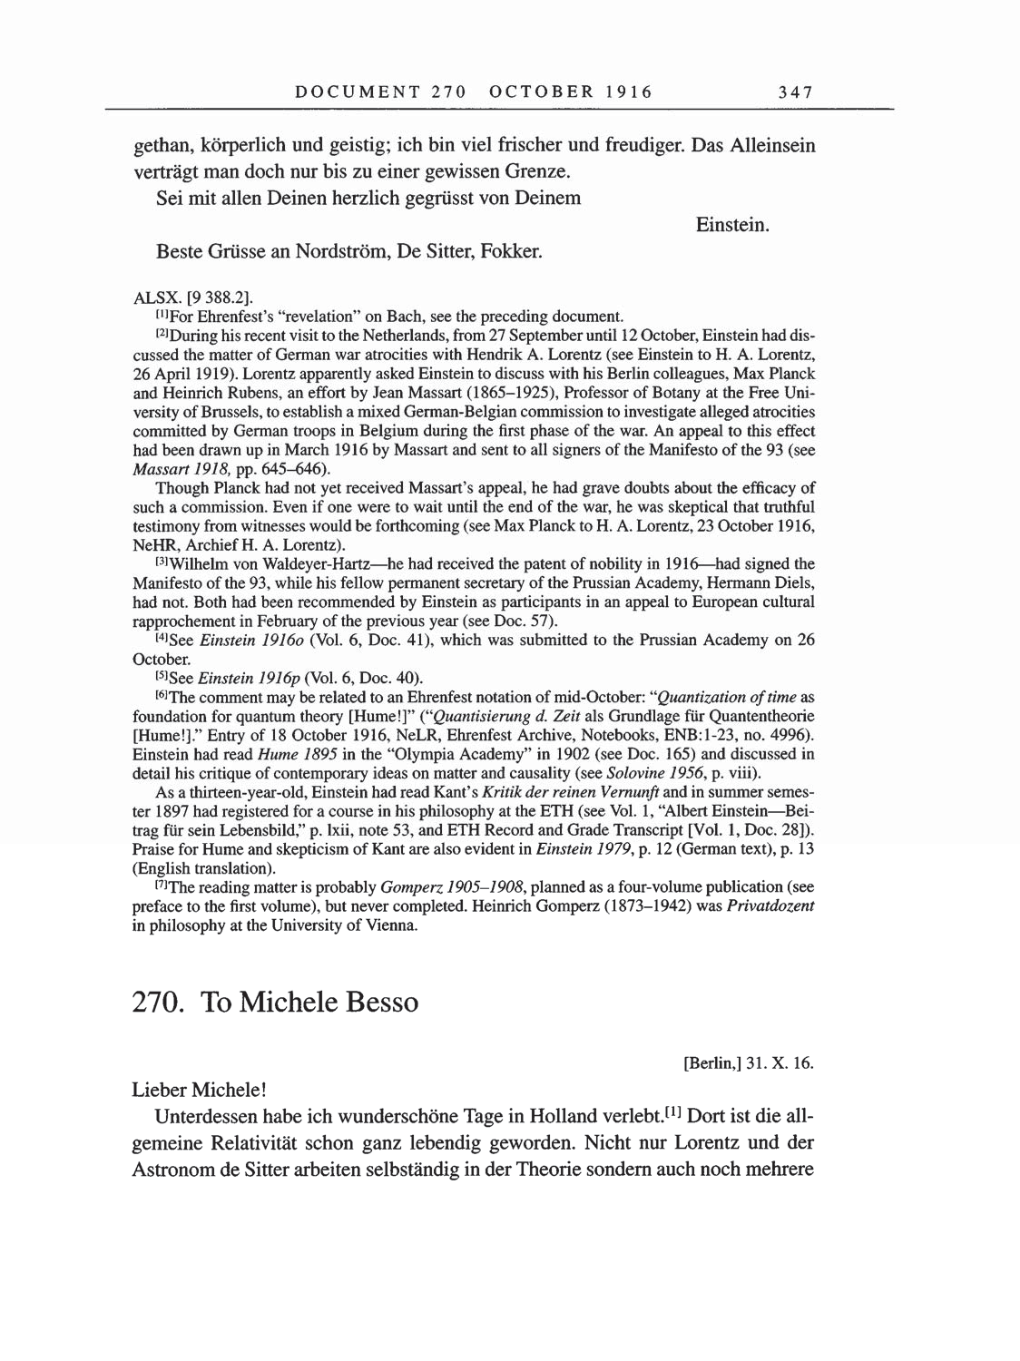 Volume 8, Part A: The Berlin Years: Correspondence 1914-1917 page 347